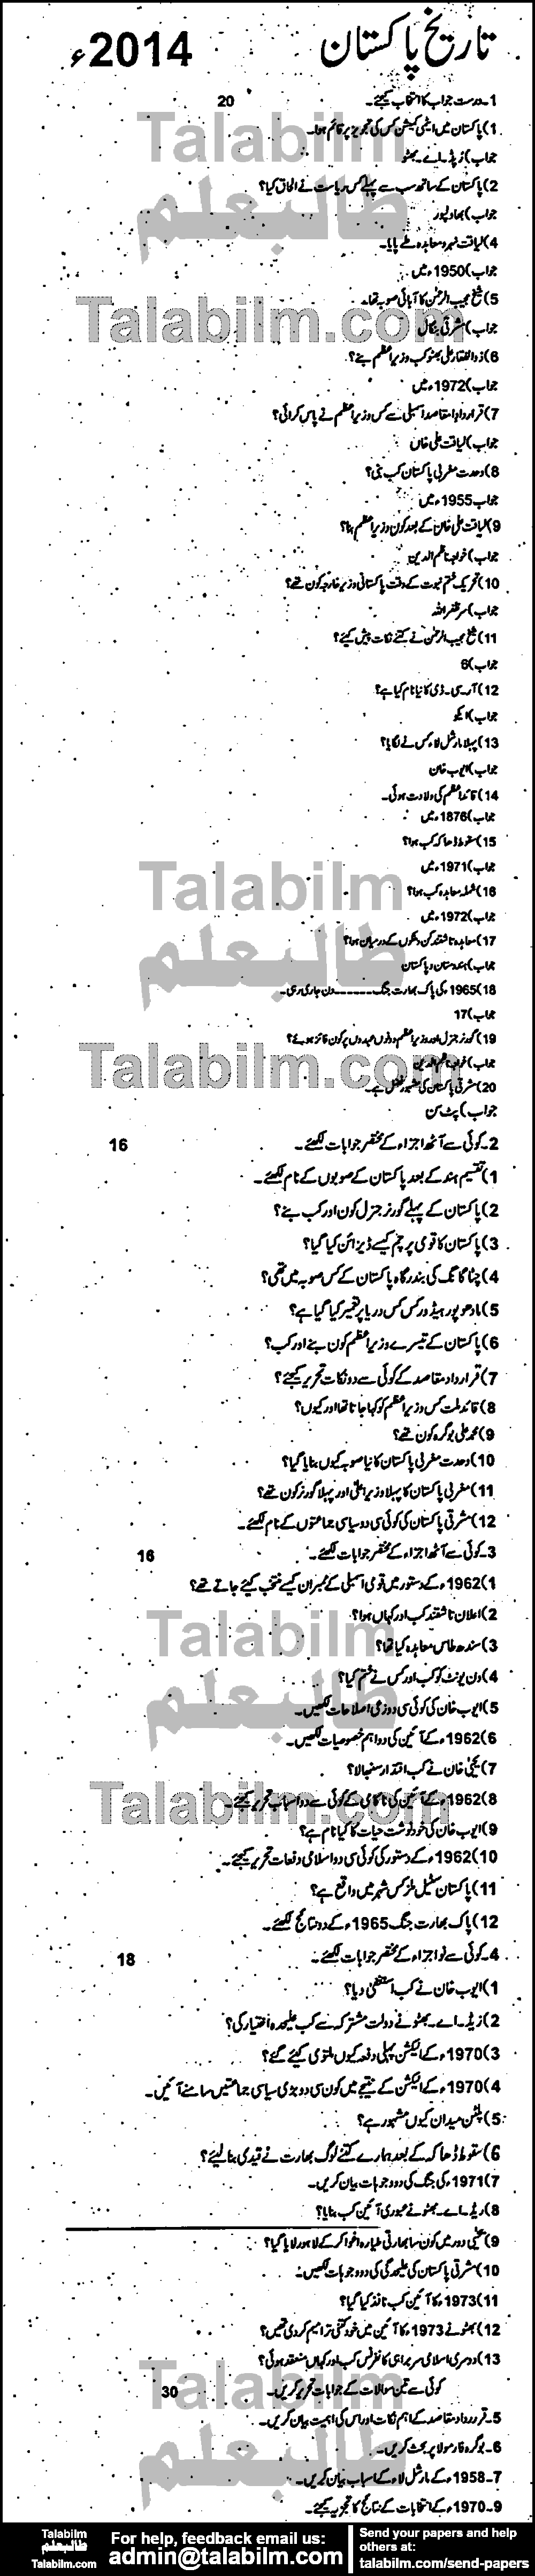 Pakistan History 0 past paper for Group-I 2014